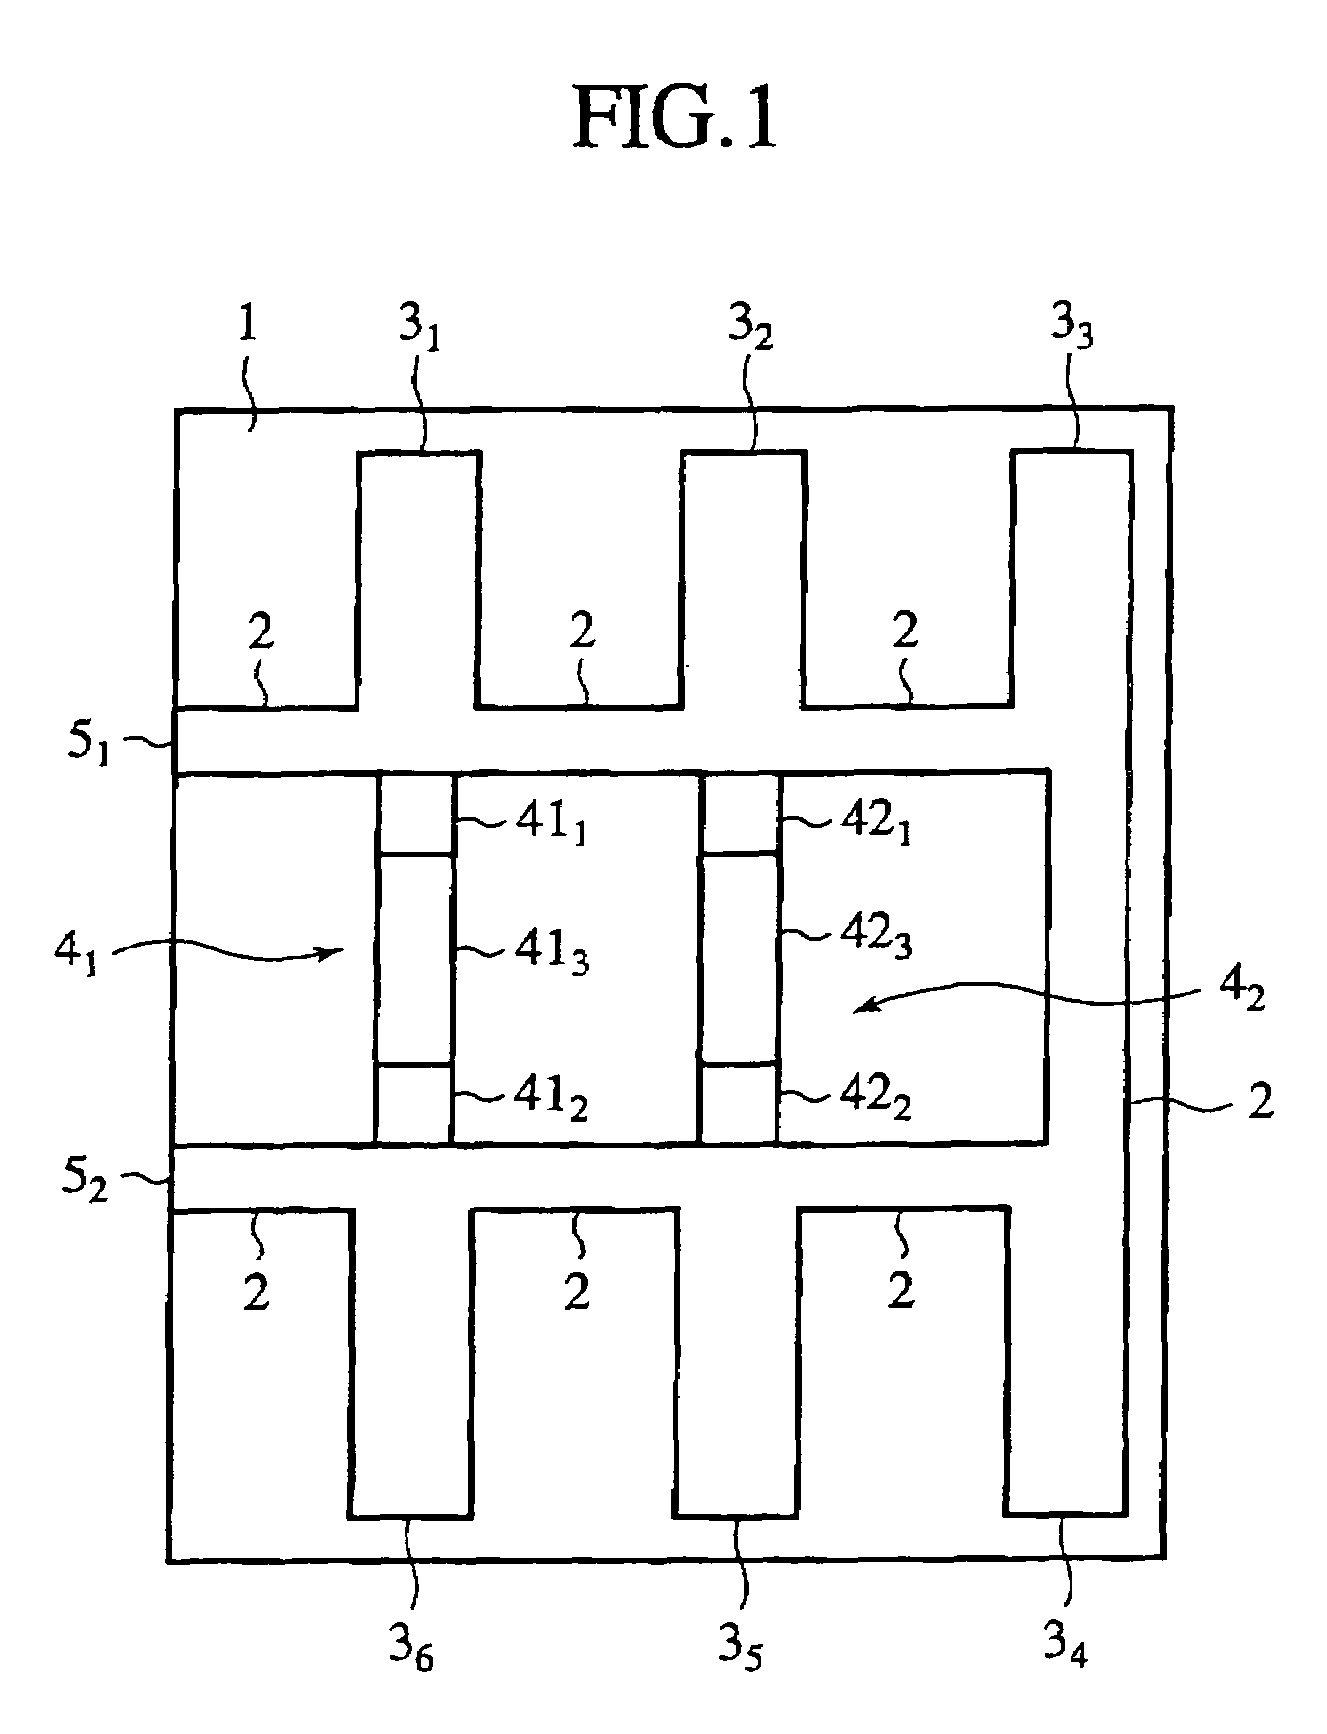 Band rejection filter with attenuation poles